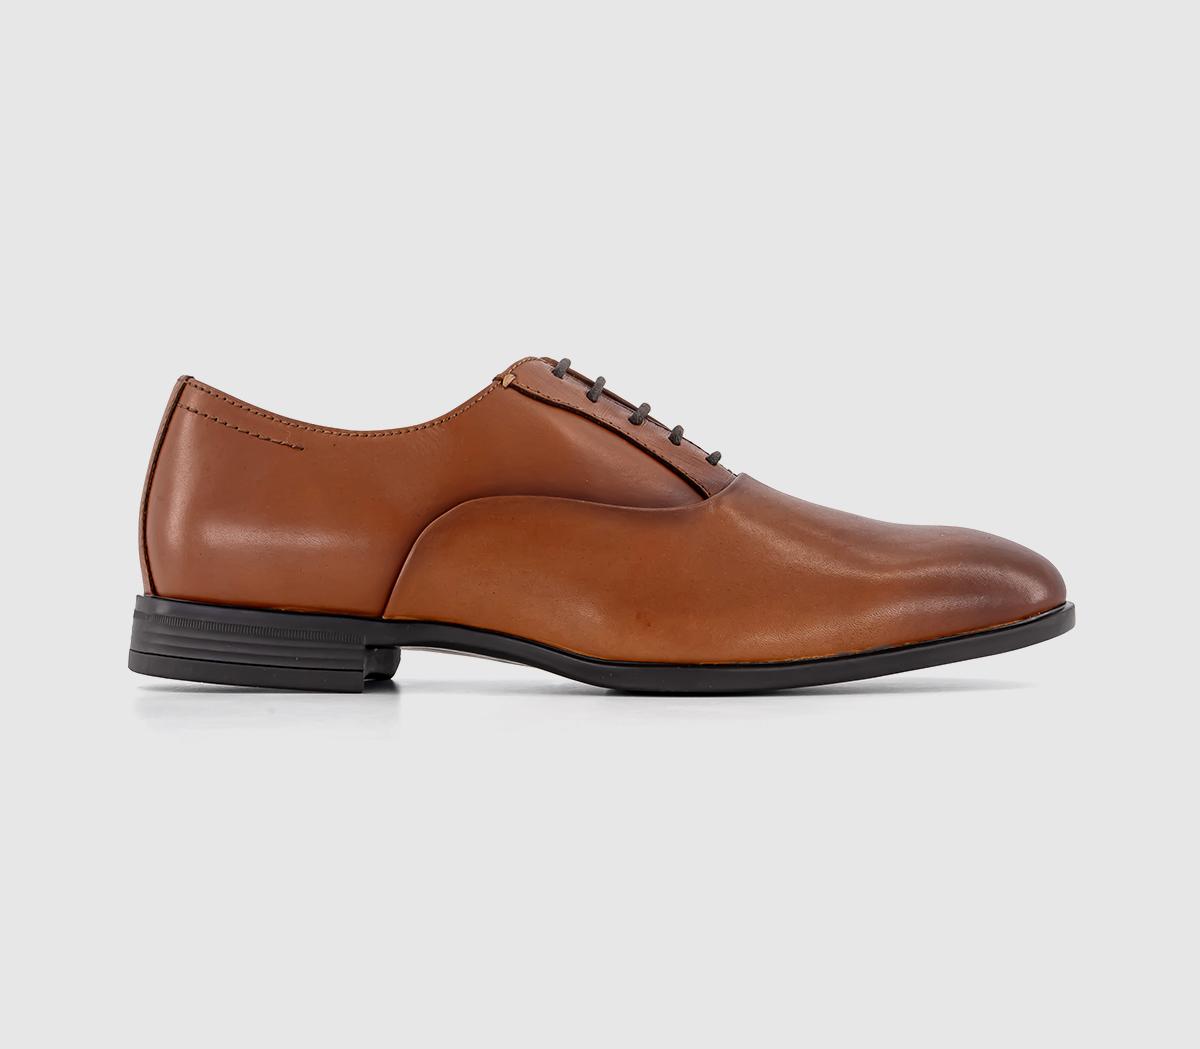 Moreton Embossed Detail Oxford Shoes Tan Leather